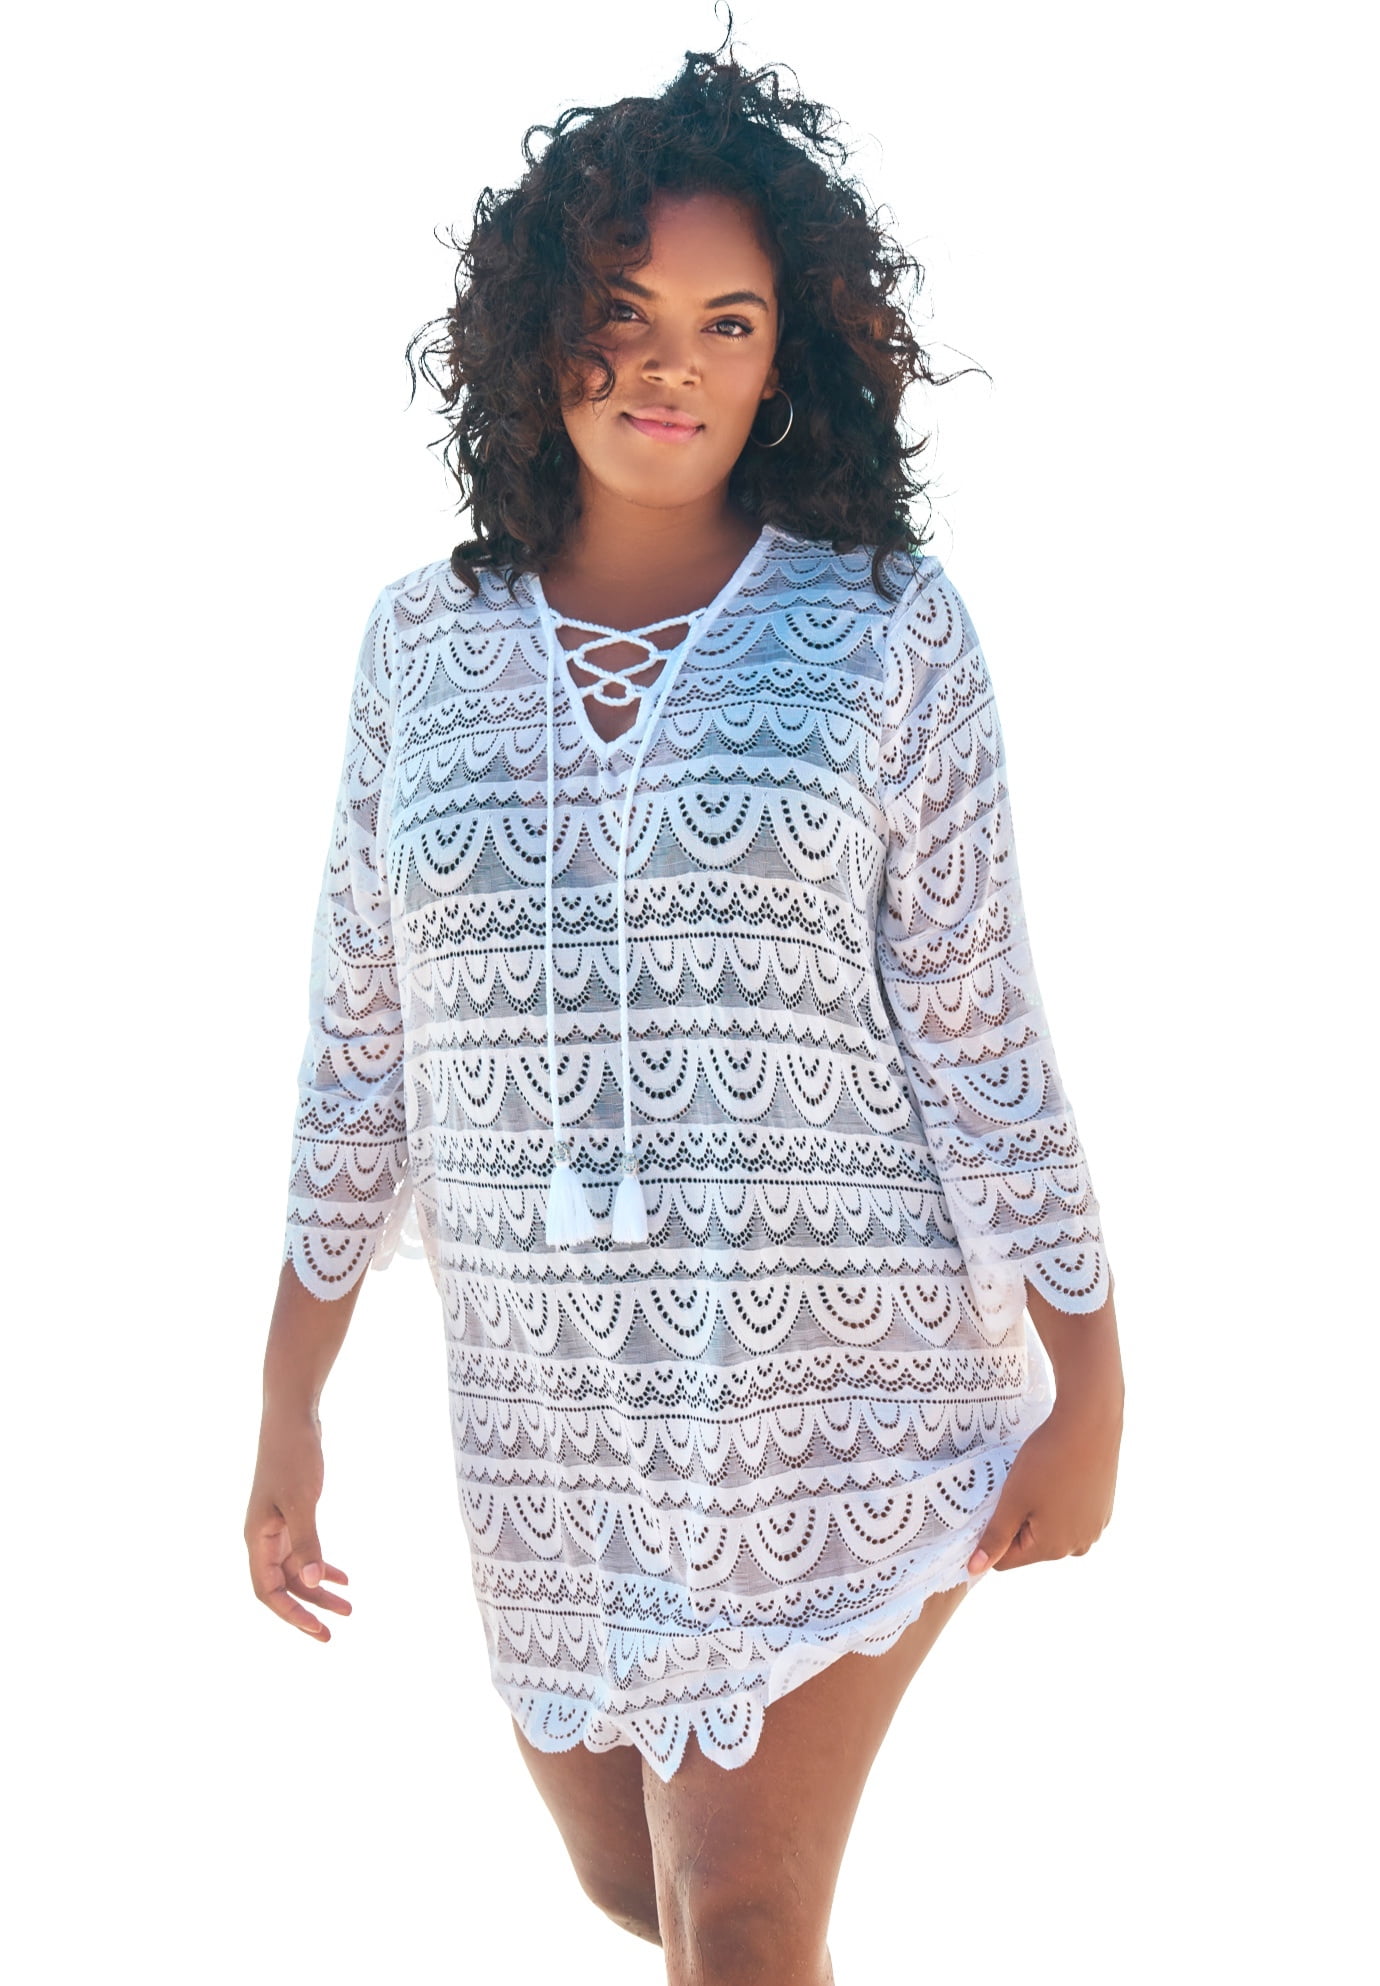 Custom Pattern Plus Size High Low Dress Swimsuit Cover Up for Women